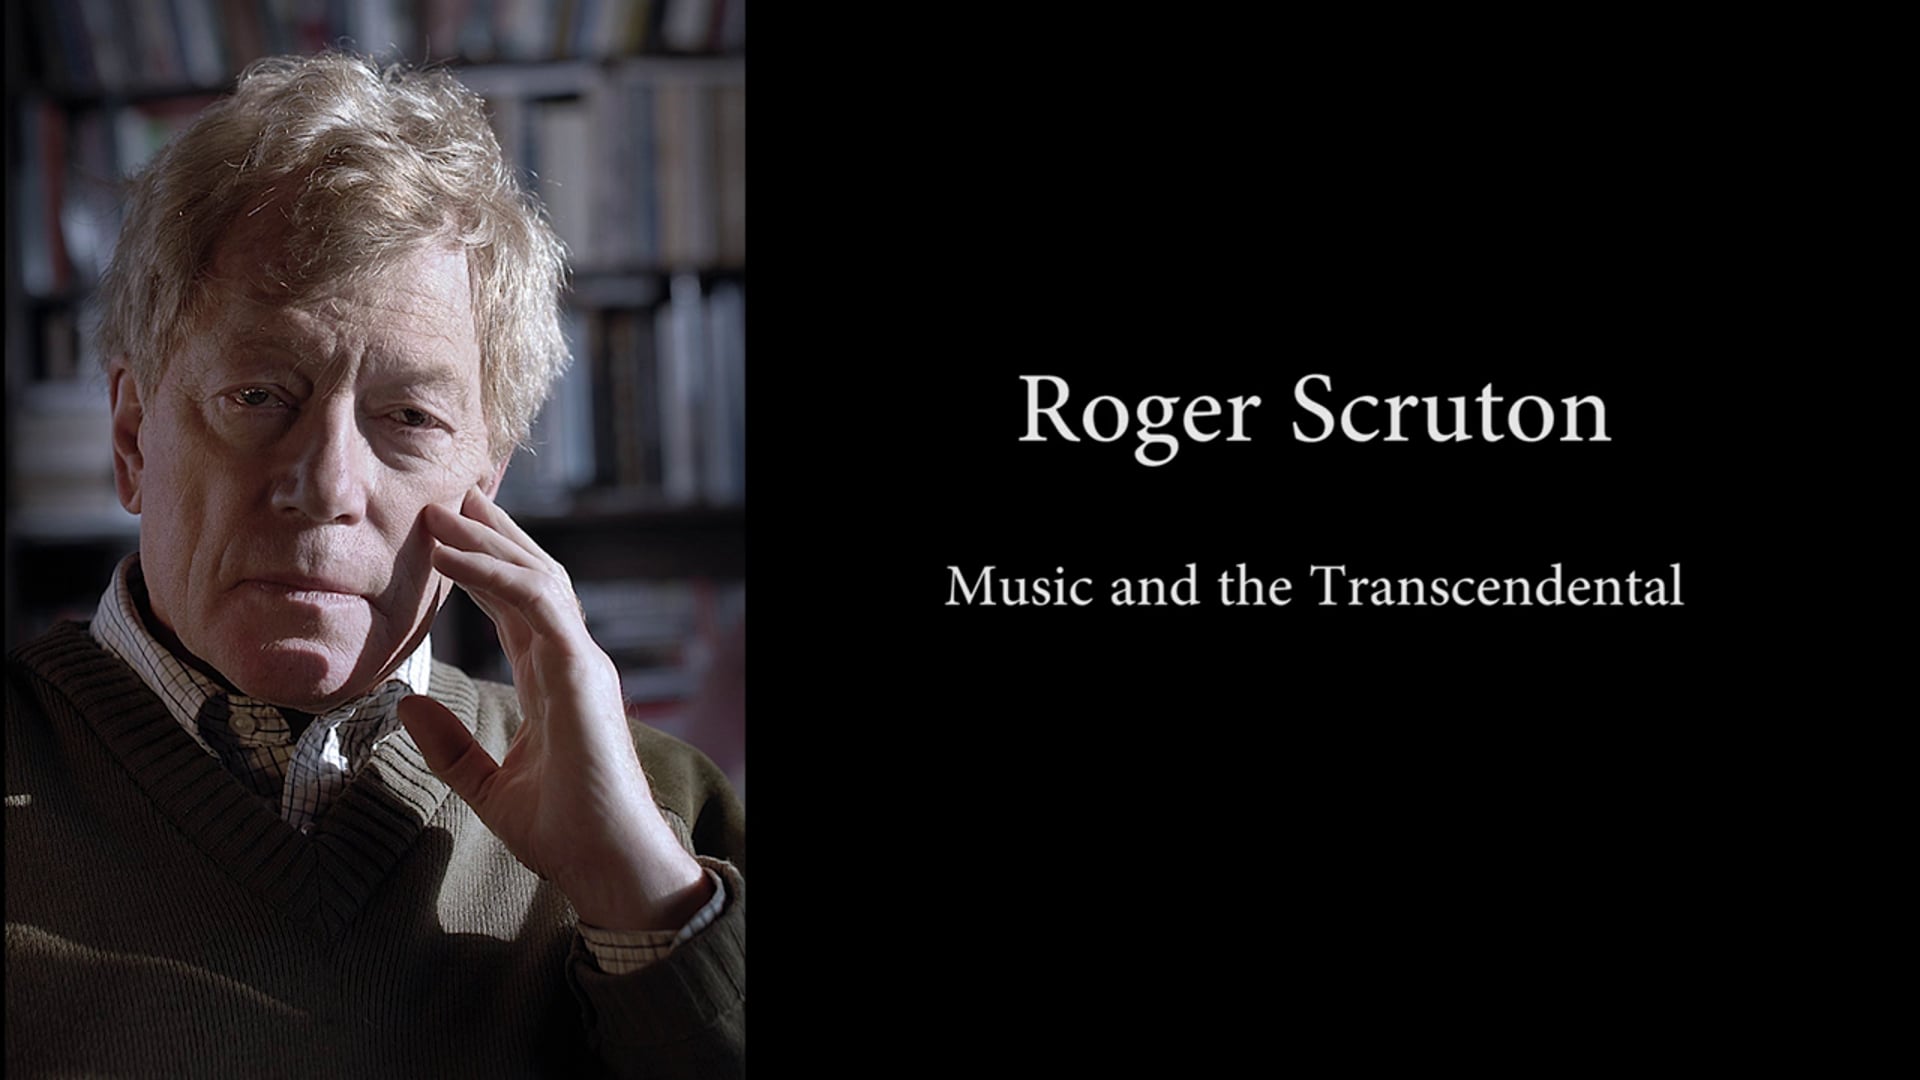 Roger Scruton: Music and the Transcendental